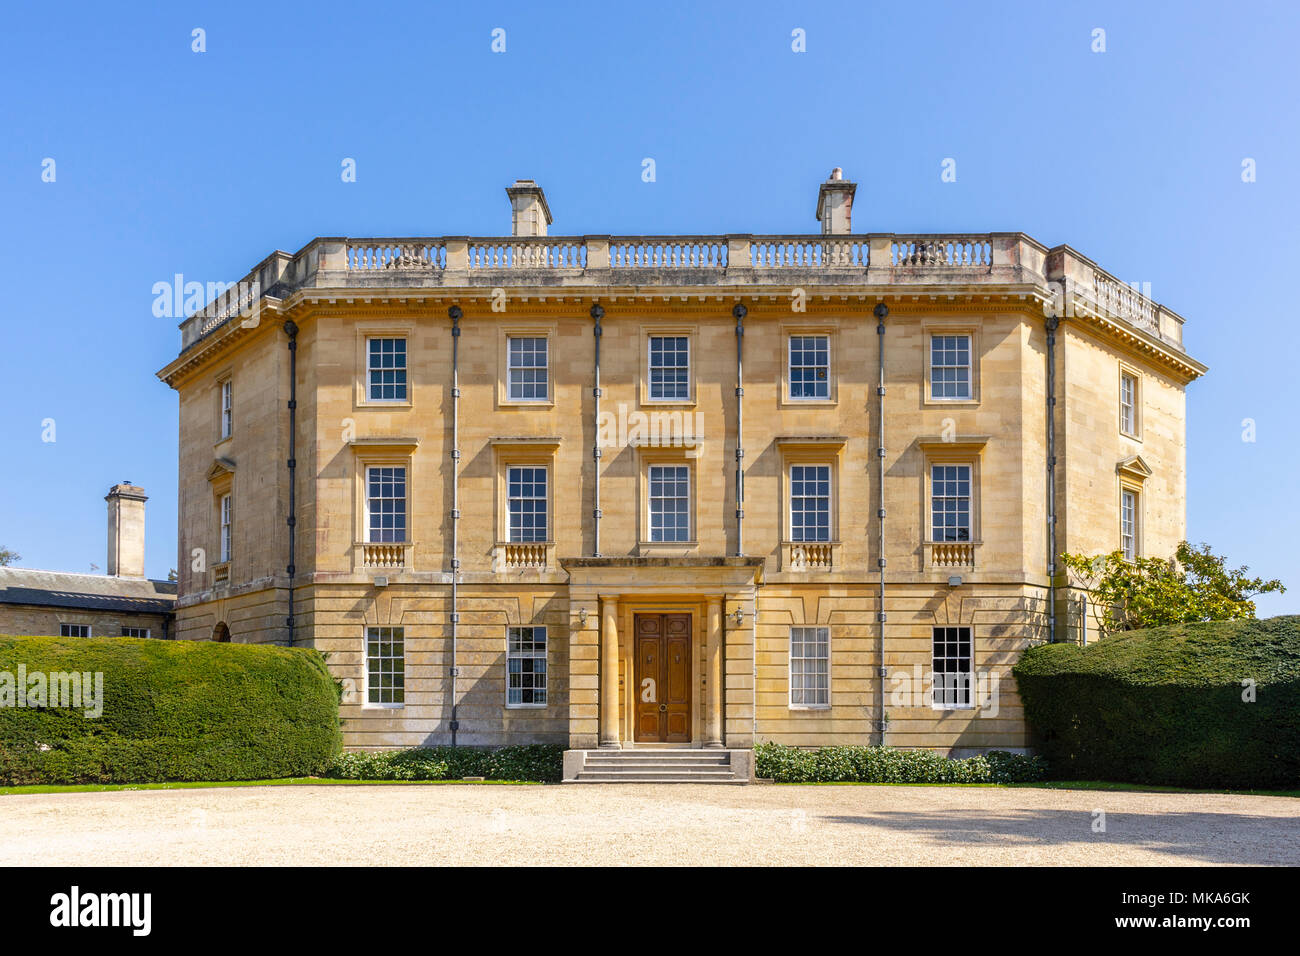 Exbury house - a Rothschild family owned property - view from Exbury gardens in Hampshire, England, UK Stock Photo